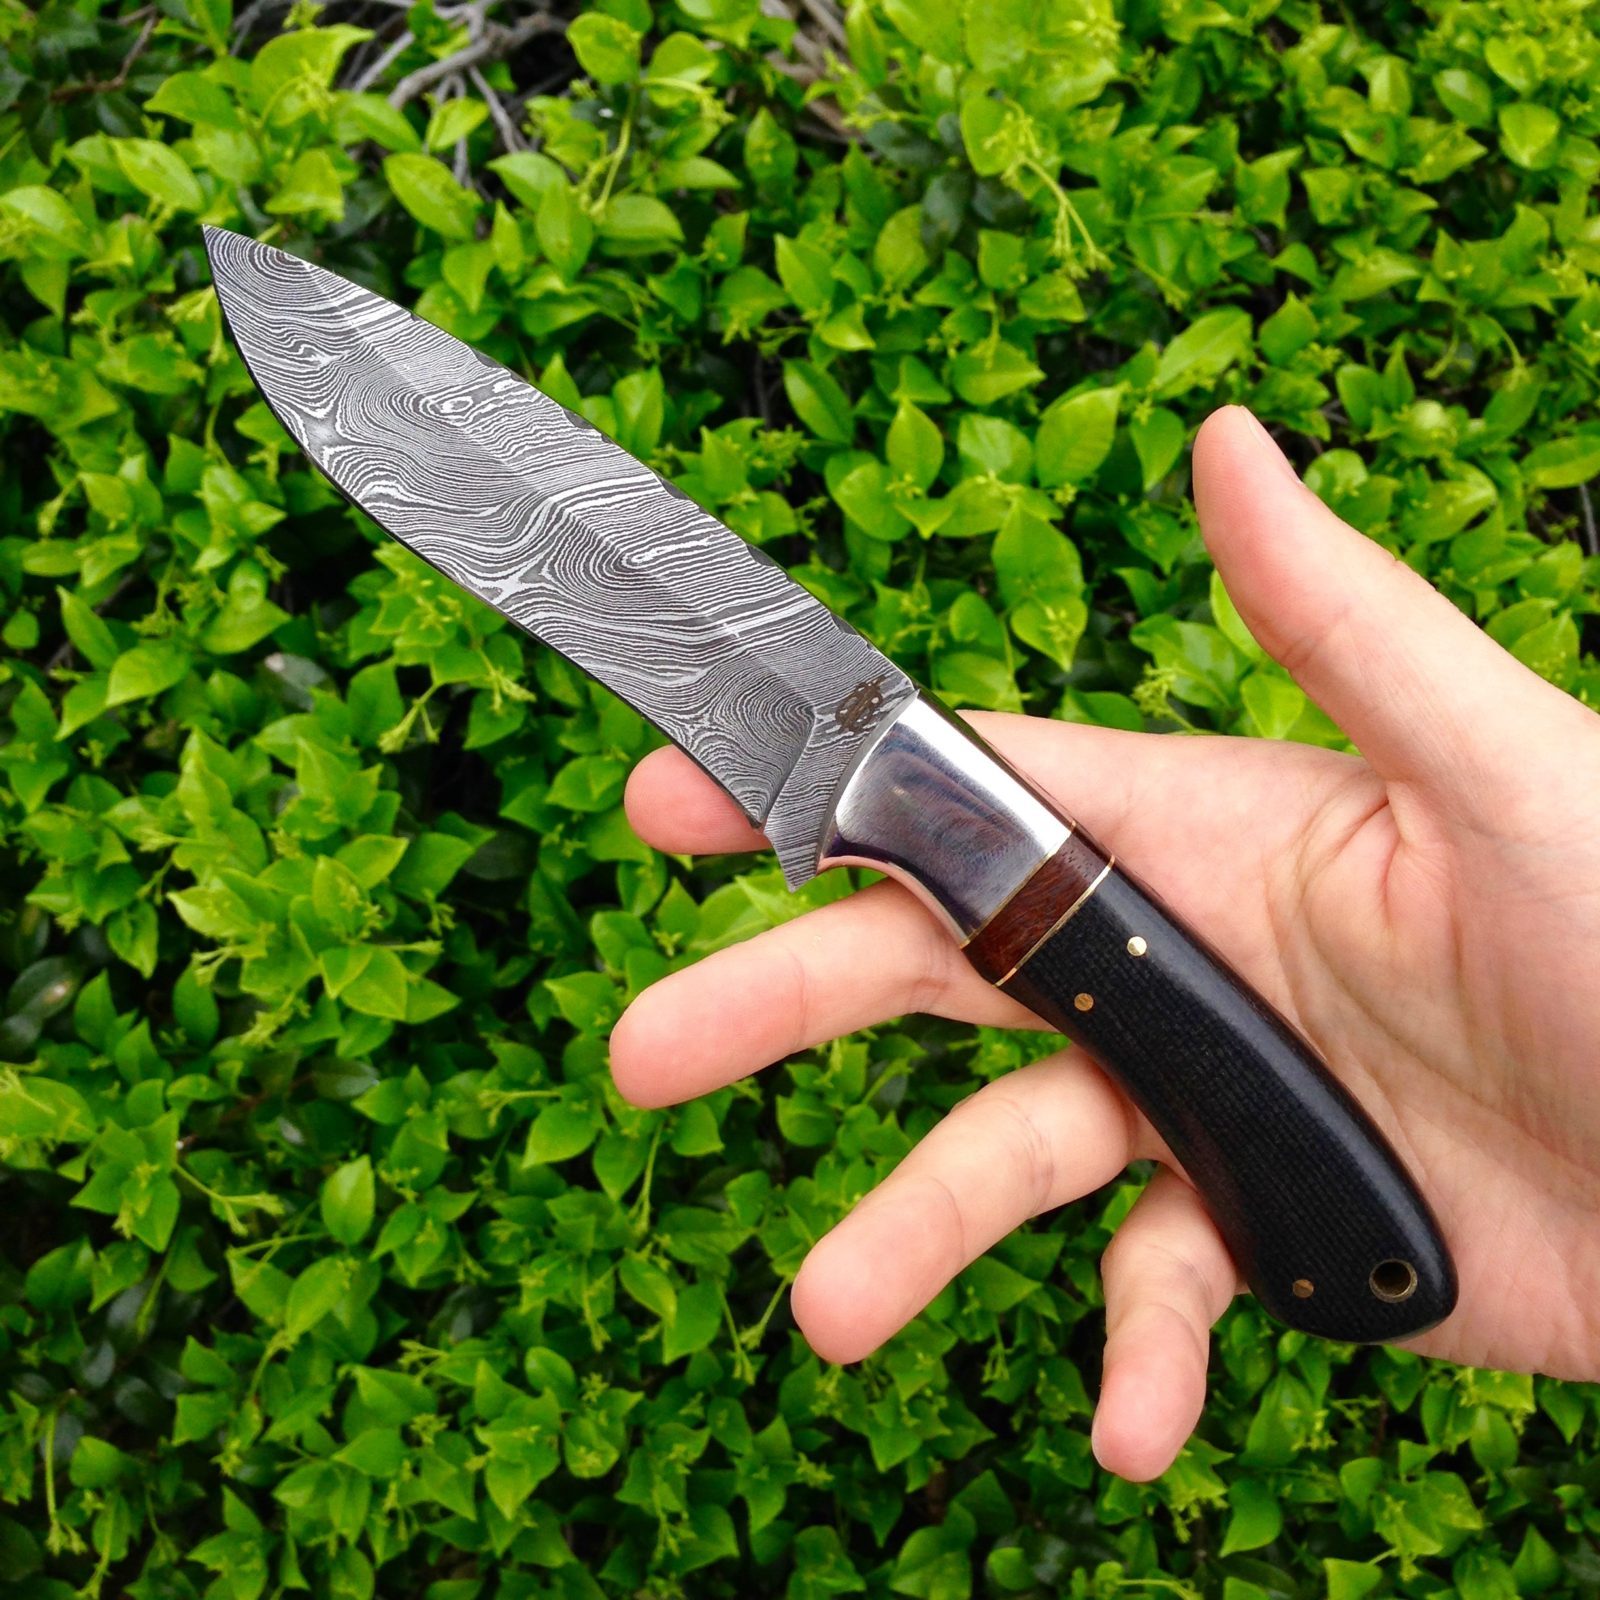 How to Tell Real Damascus Steel Knives vs Fake Blades - Knife Depot